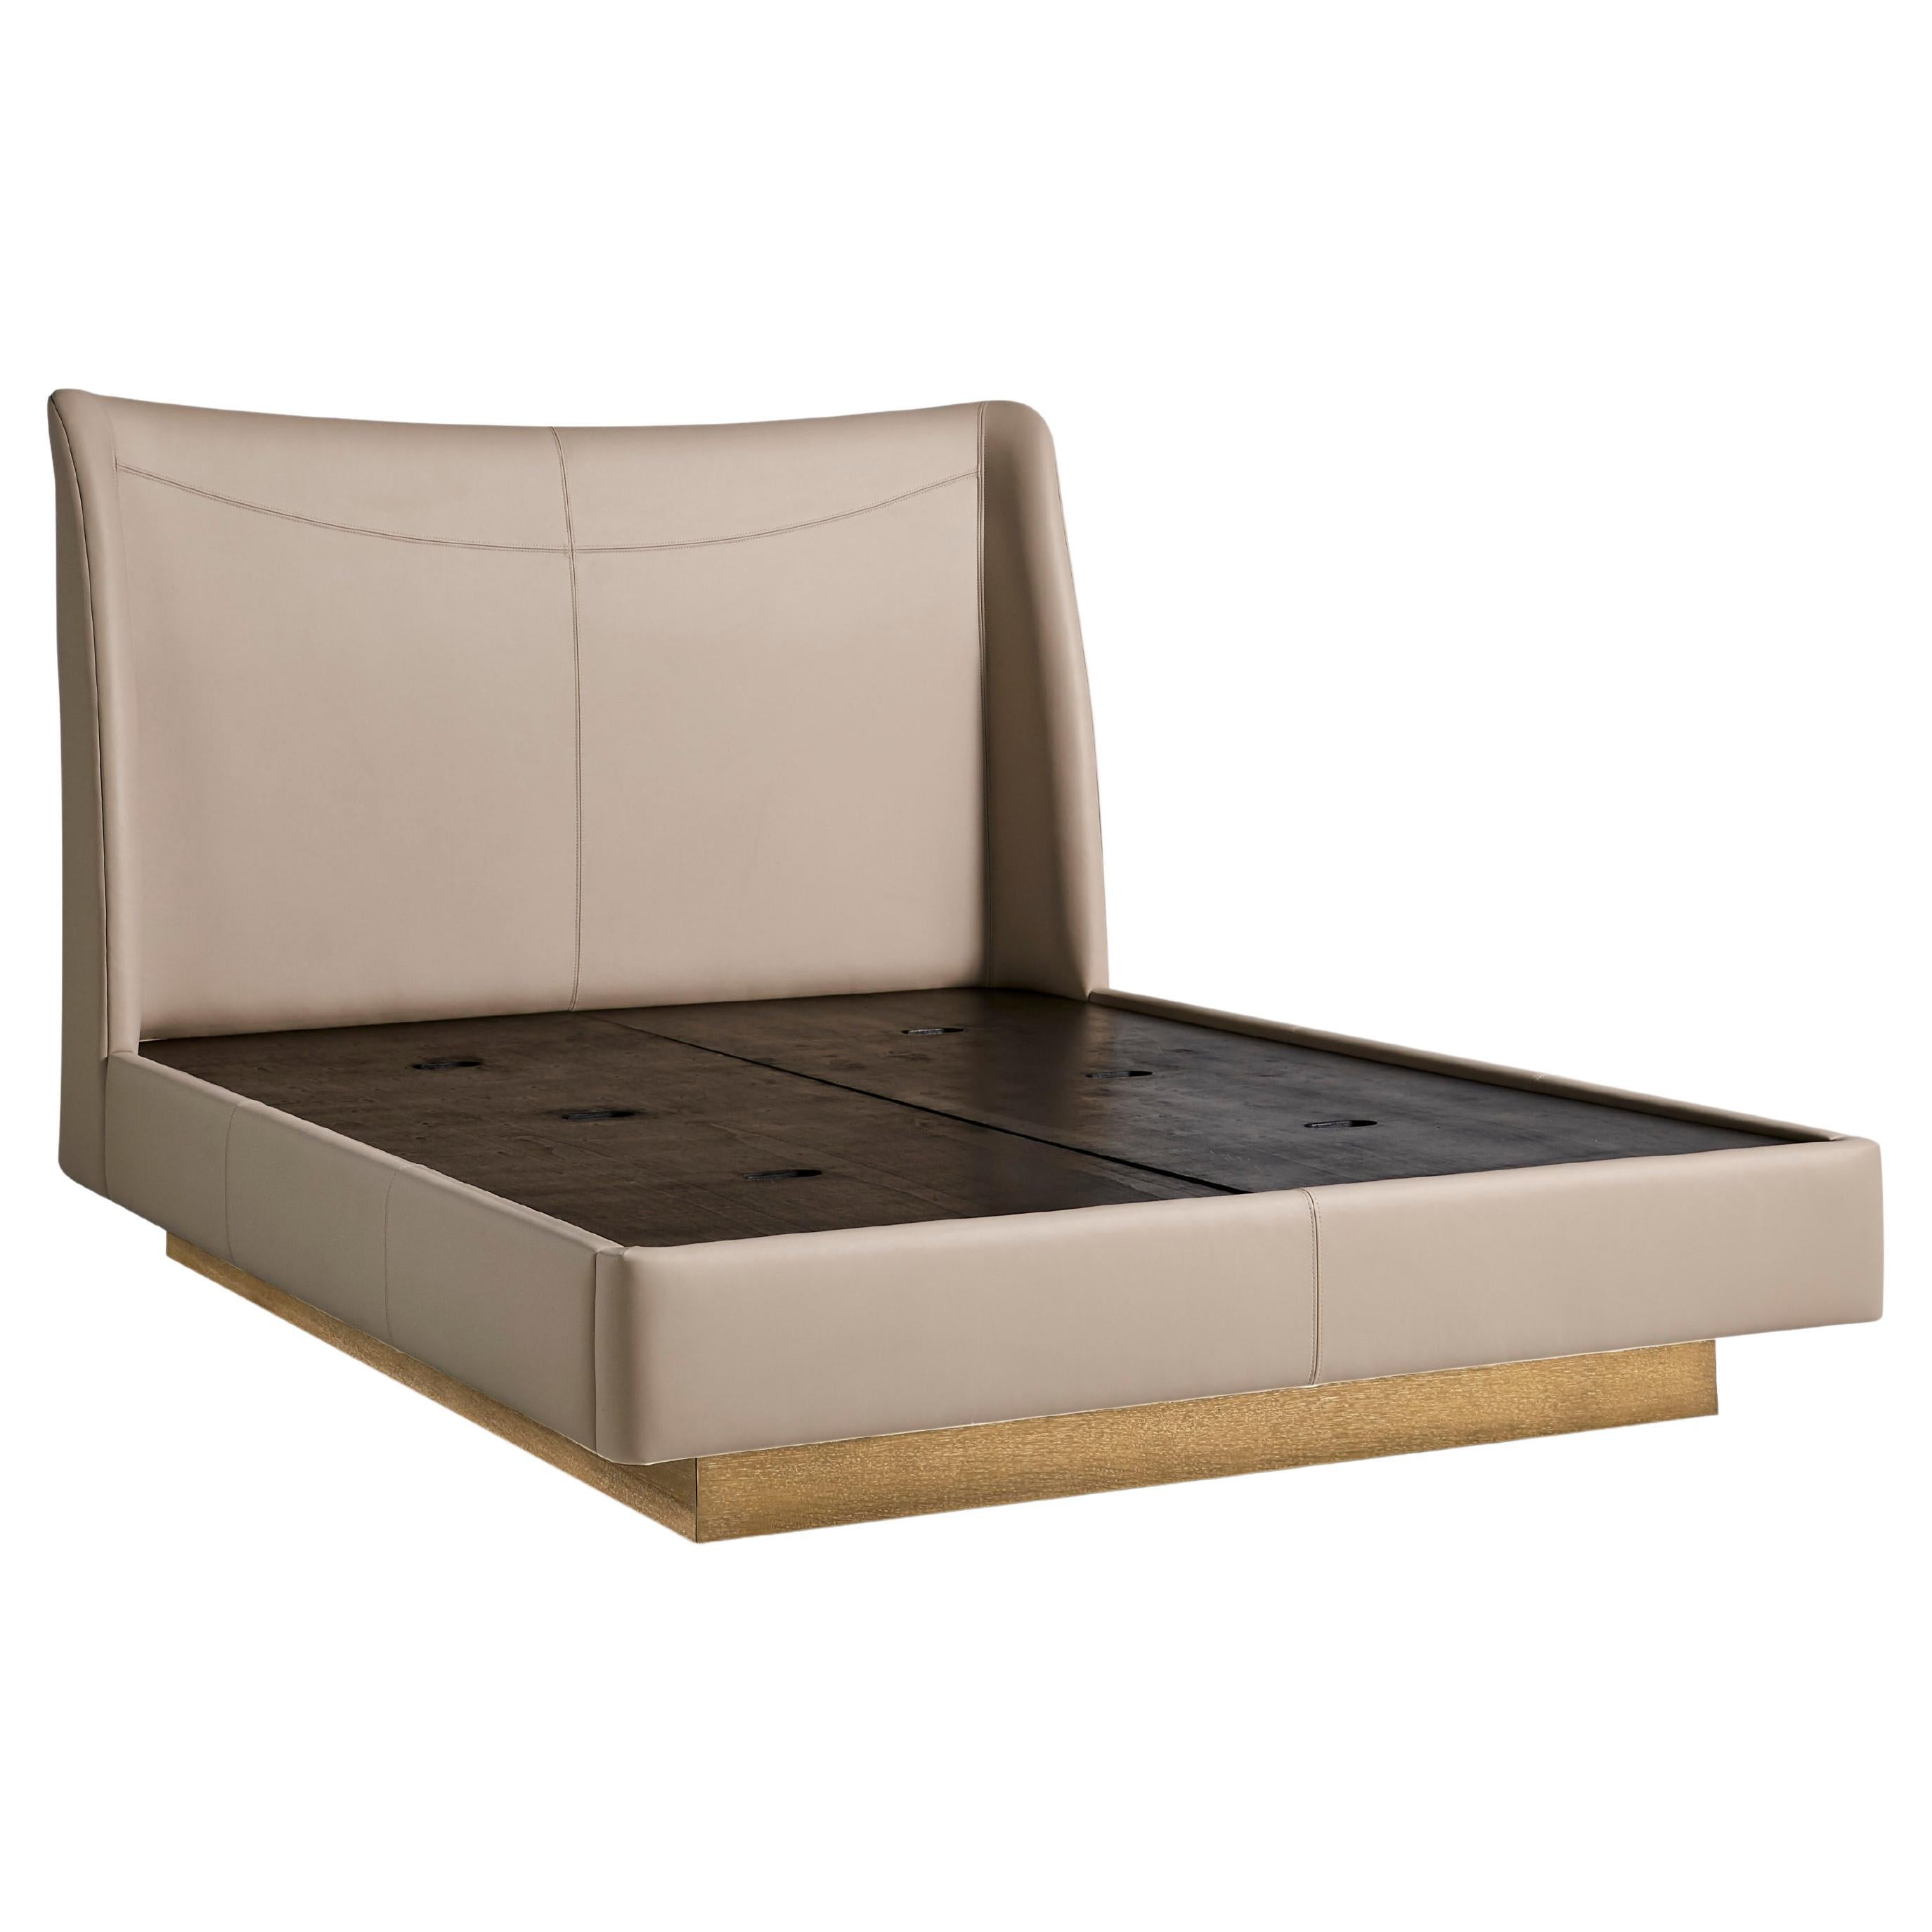 Aspen Bed - Leather Upholstered Bed with Wood Base (Queen) For Sale